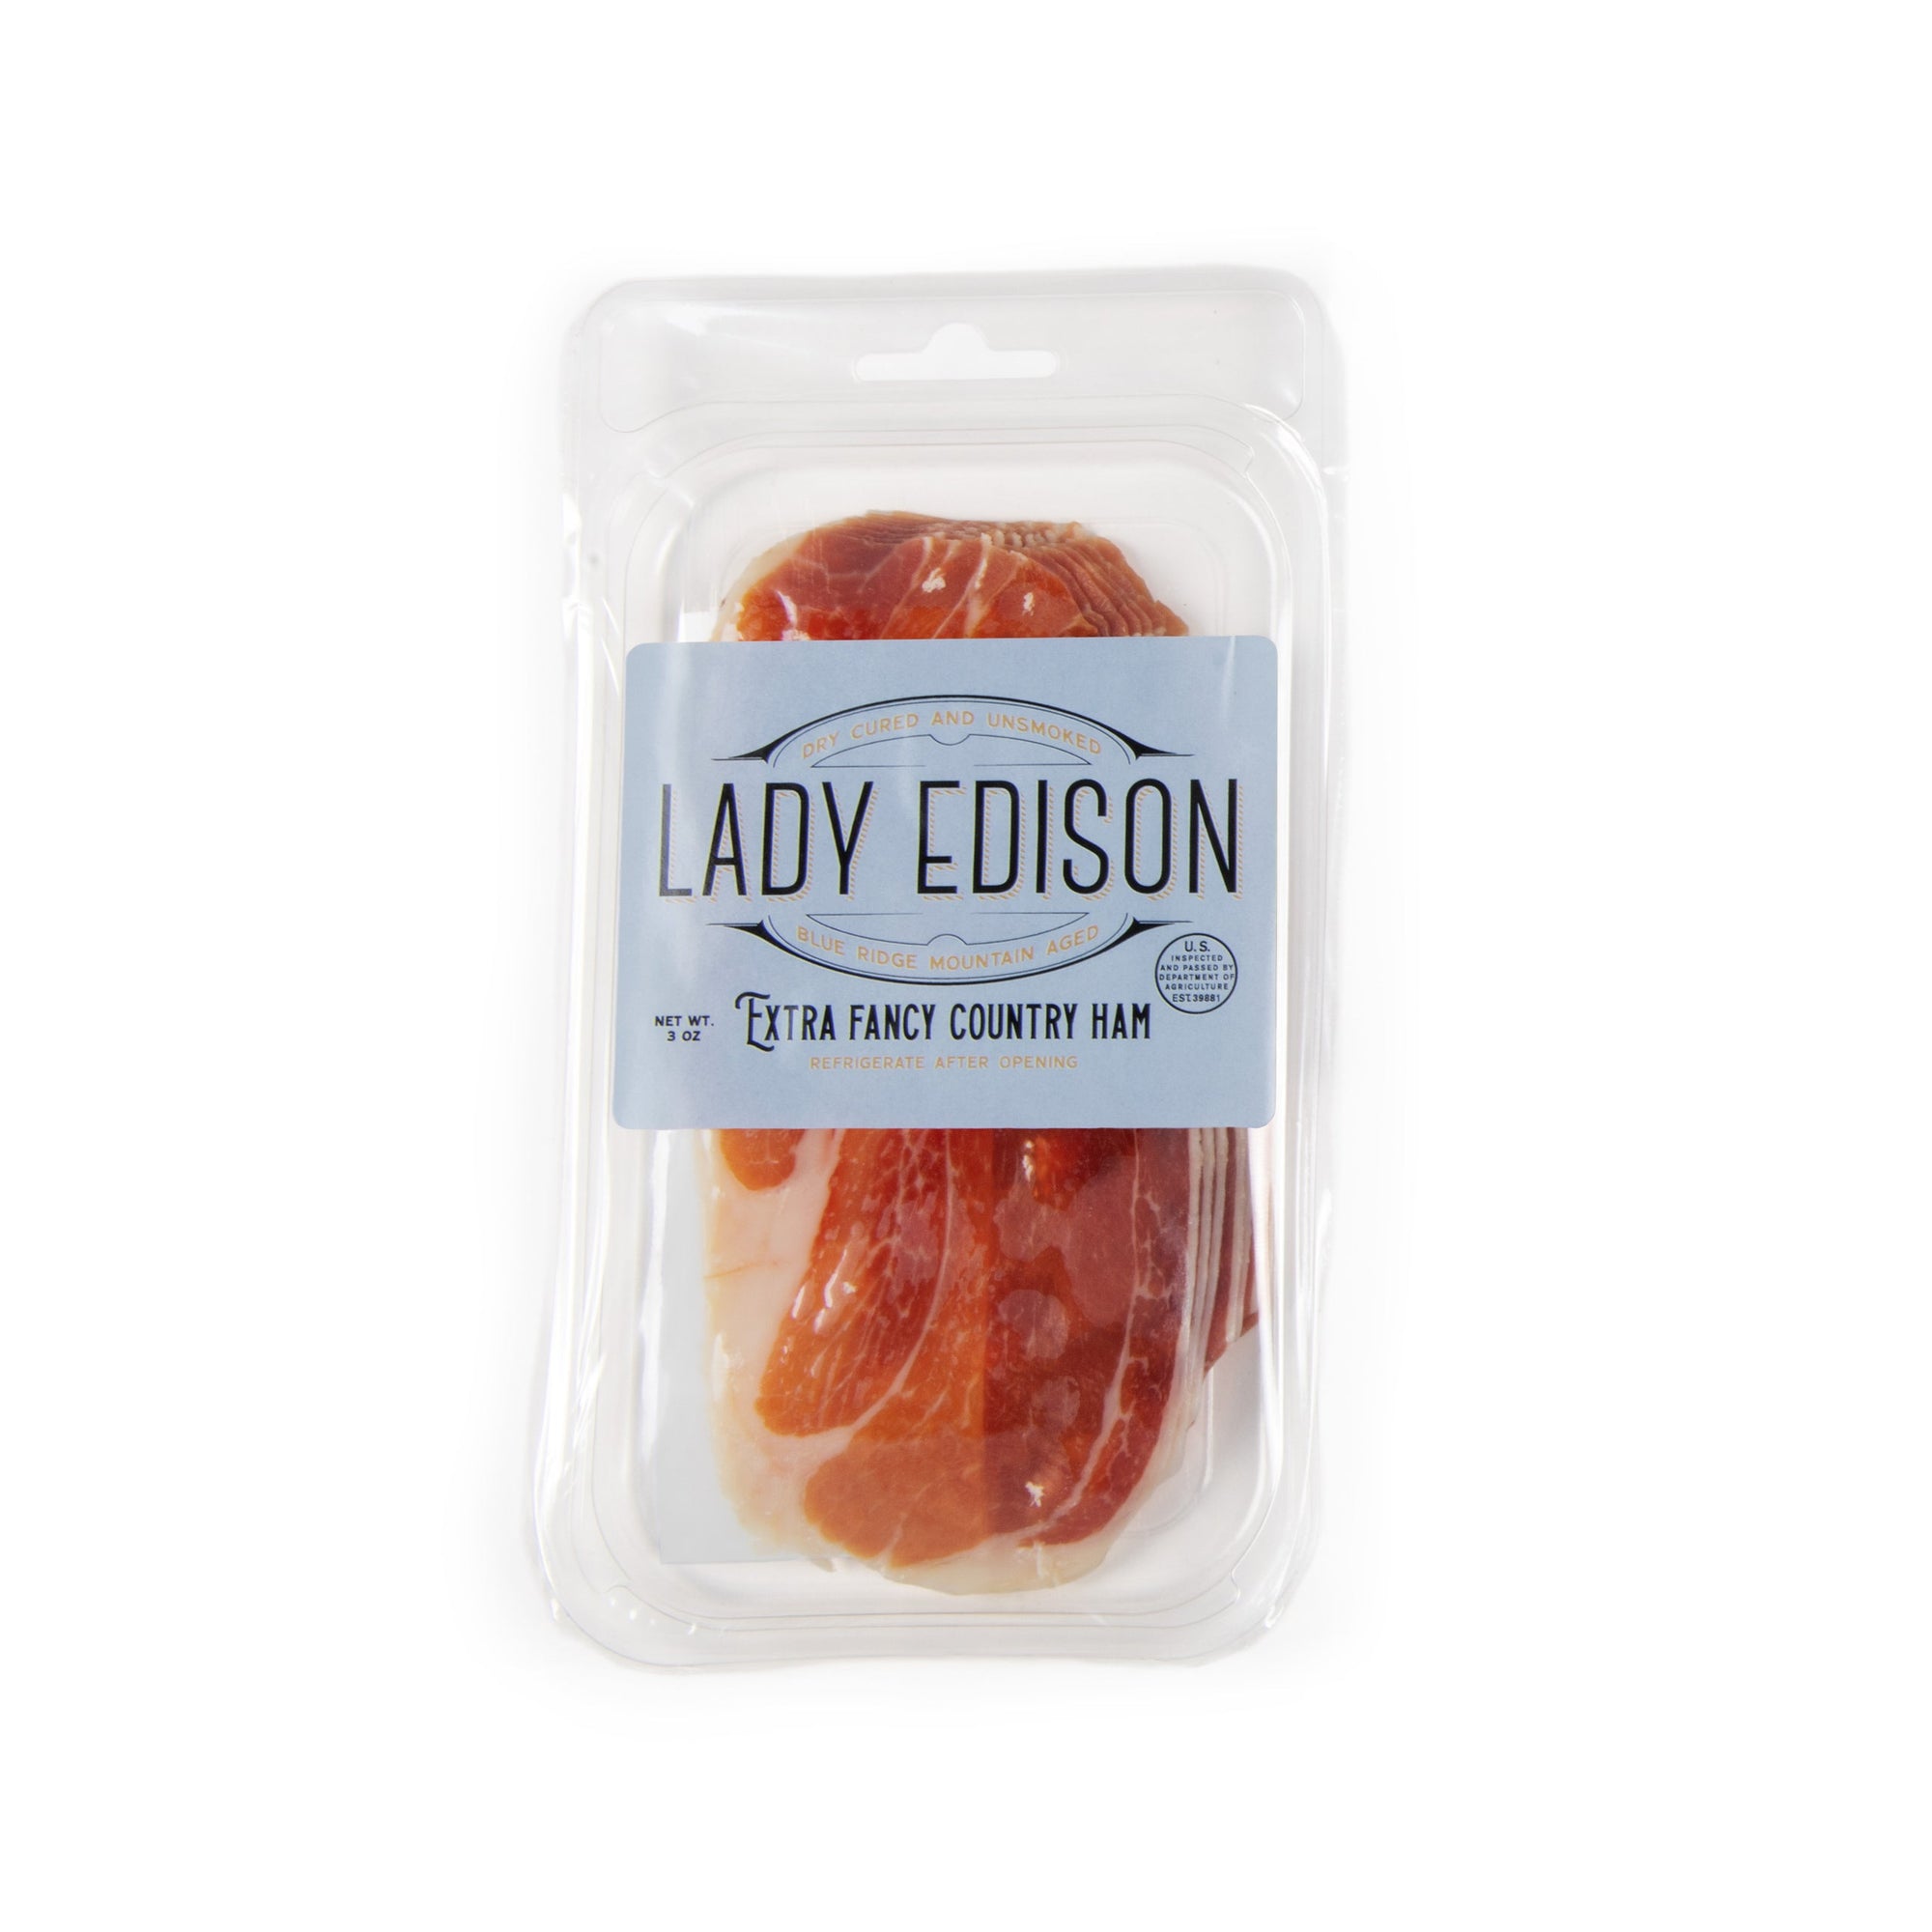 Lady Edison Extra Fancy Country Ham made in North Carolina. 